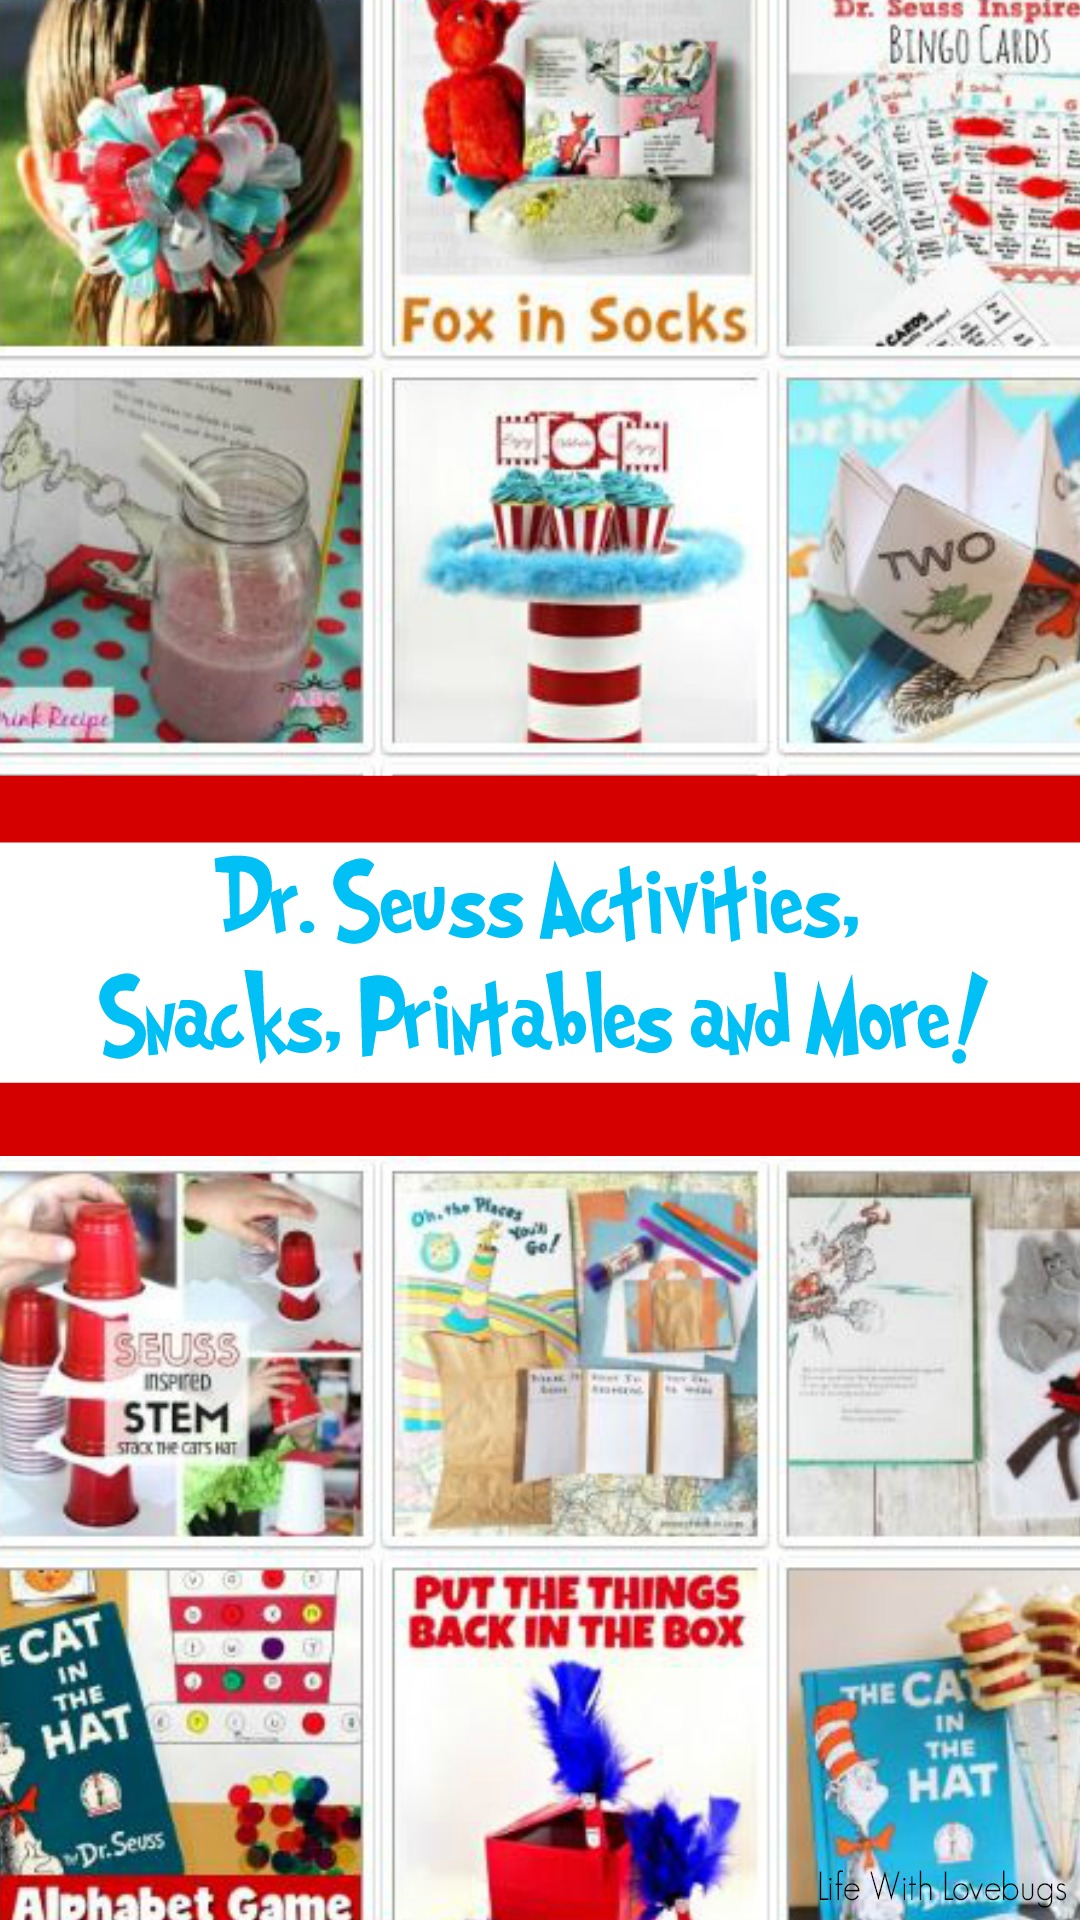 Dr. Seuss Inspired Activities, Snacks, Printables and more!